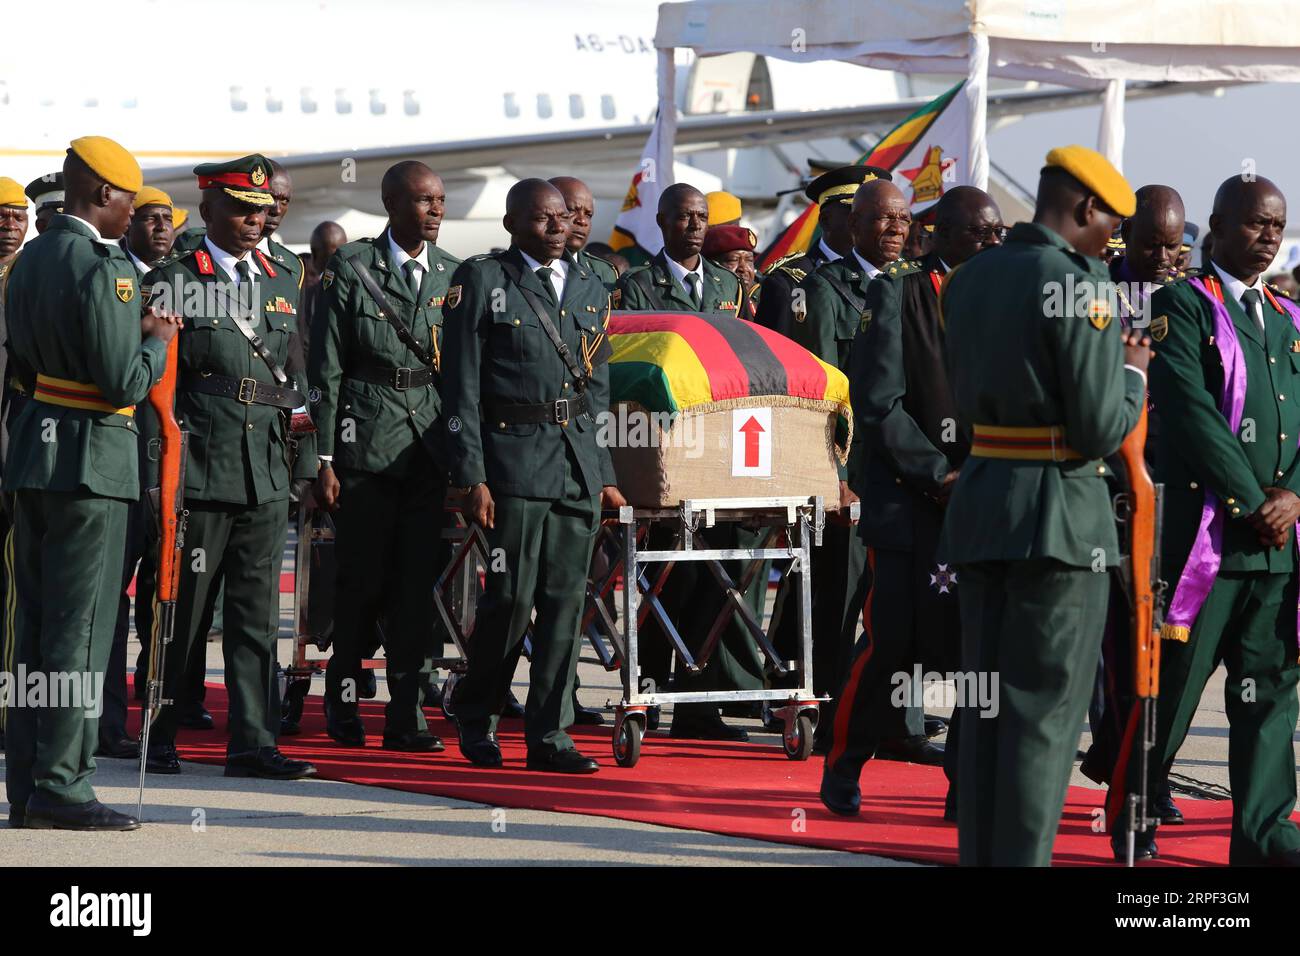 Leichnam von langjährigem Präsidenten Robert Mugabe in Simbabwe angekommen (190911) -- HARARE, Sept. 11, 2019 (Xinhua) -- The body of the late former Zimbabwean President Robert Mugabe arrives at the Robert Gabriel Mugabe International Airport in Harare, Zimbabwe, on Sept. 11, 2019. The body of the late former Zimbabwean President Robert Mugabe, who died in Singapore last Friday aged 95, arrived in the country on Wednesday afternoon ahead of his burial planned for Sunday. (Xinhua/Chen Yaqin) ZIMBABWE-HARARE-MUGABE-BODY-ARRIVAL PUBLICATIONxNOTxINxCHN Stock Photo